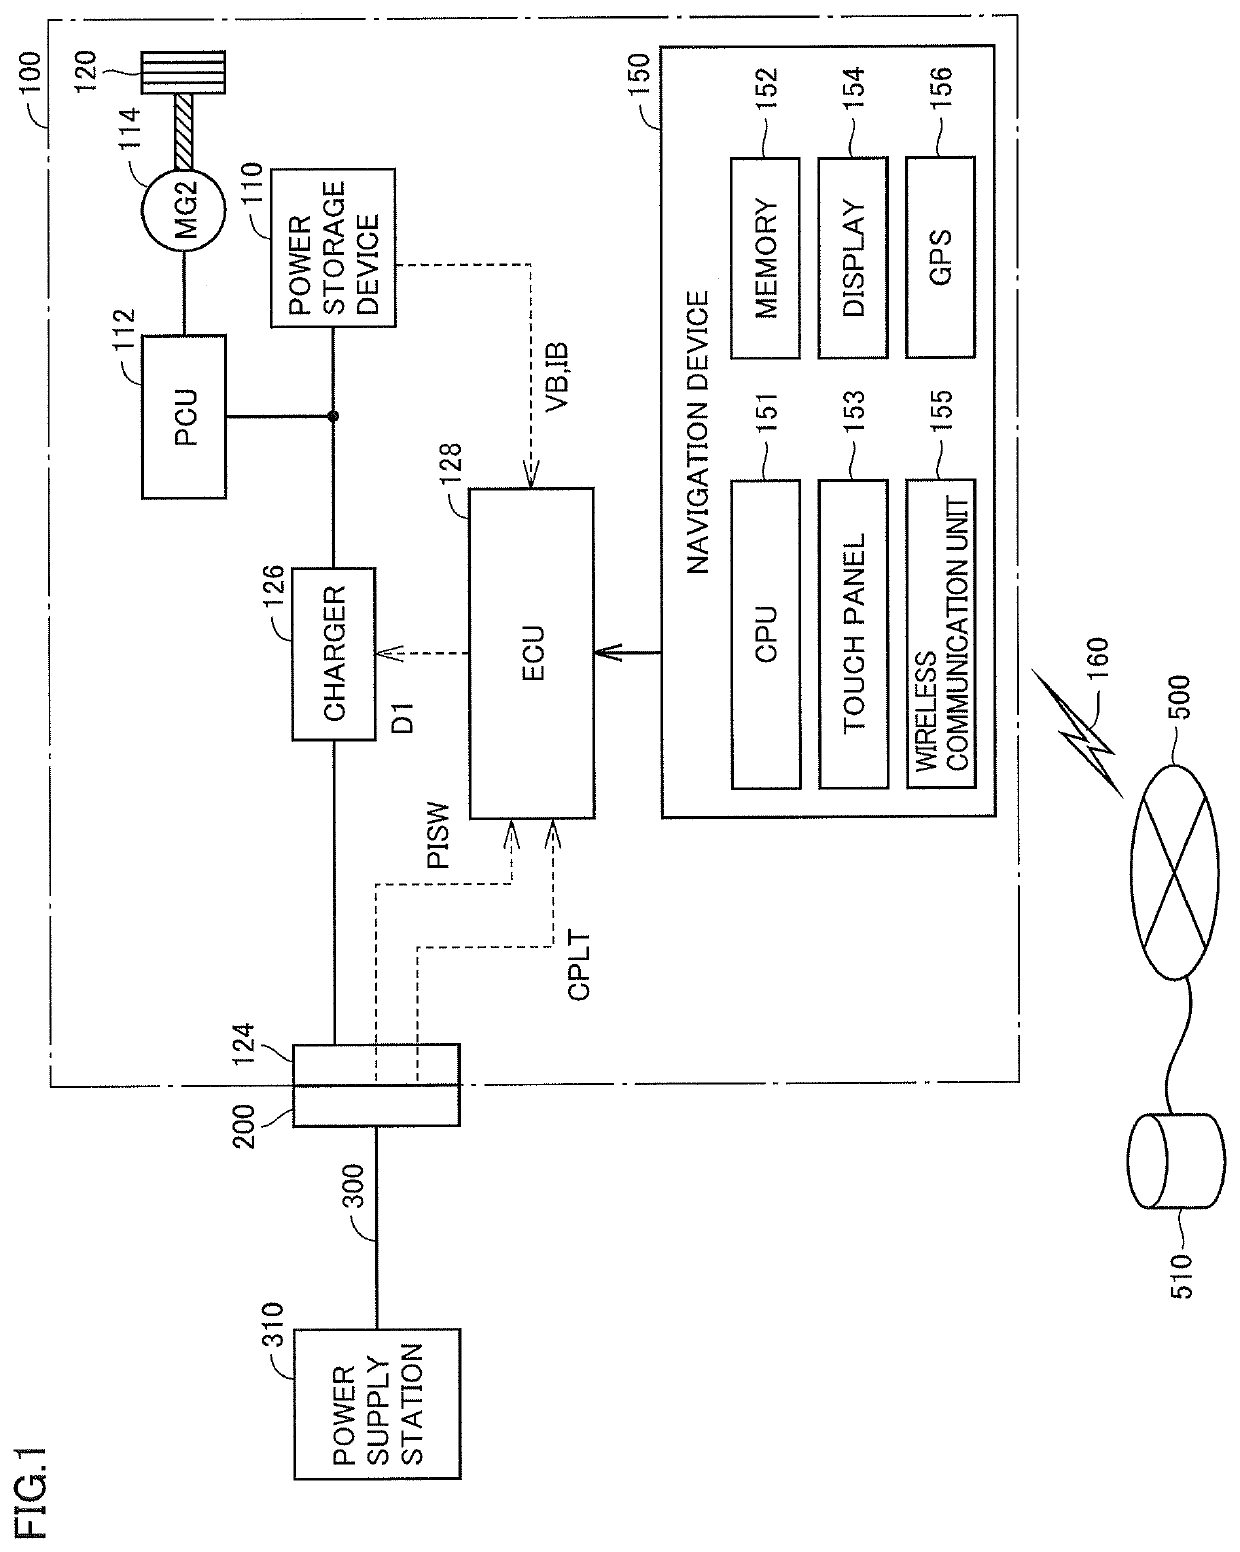 Alerting device of electrically powered vehicle